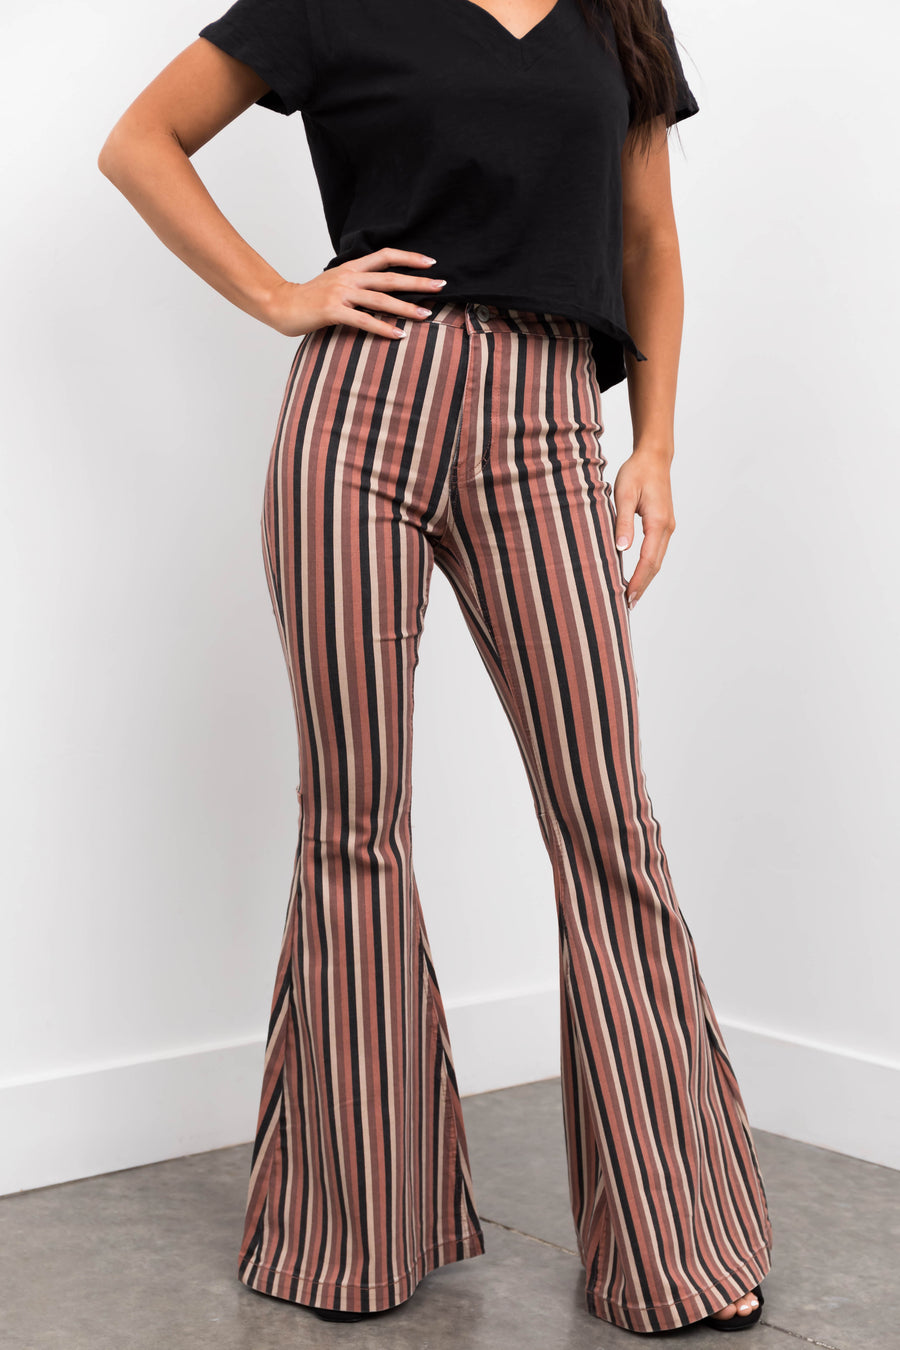 KanCan Rose Taupe Striped Super Flare Jeans